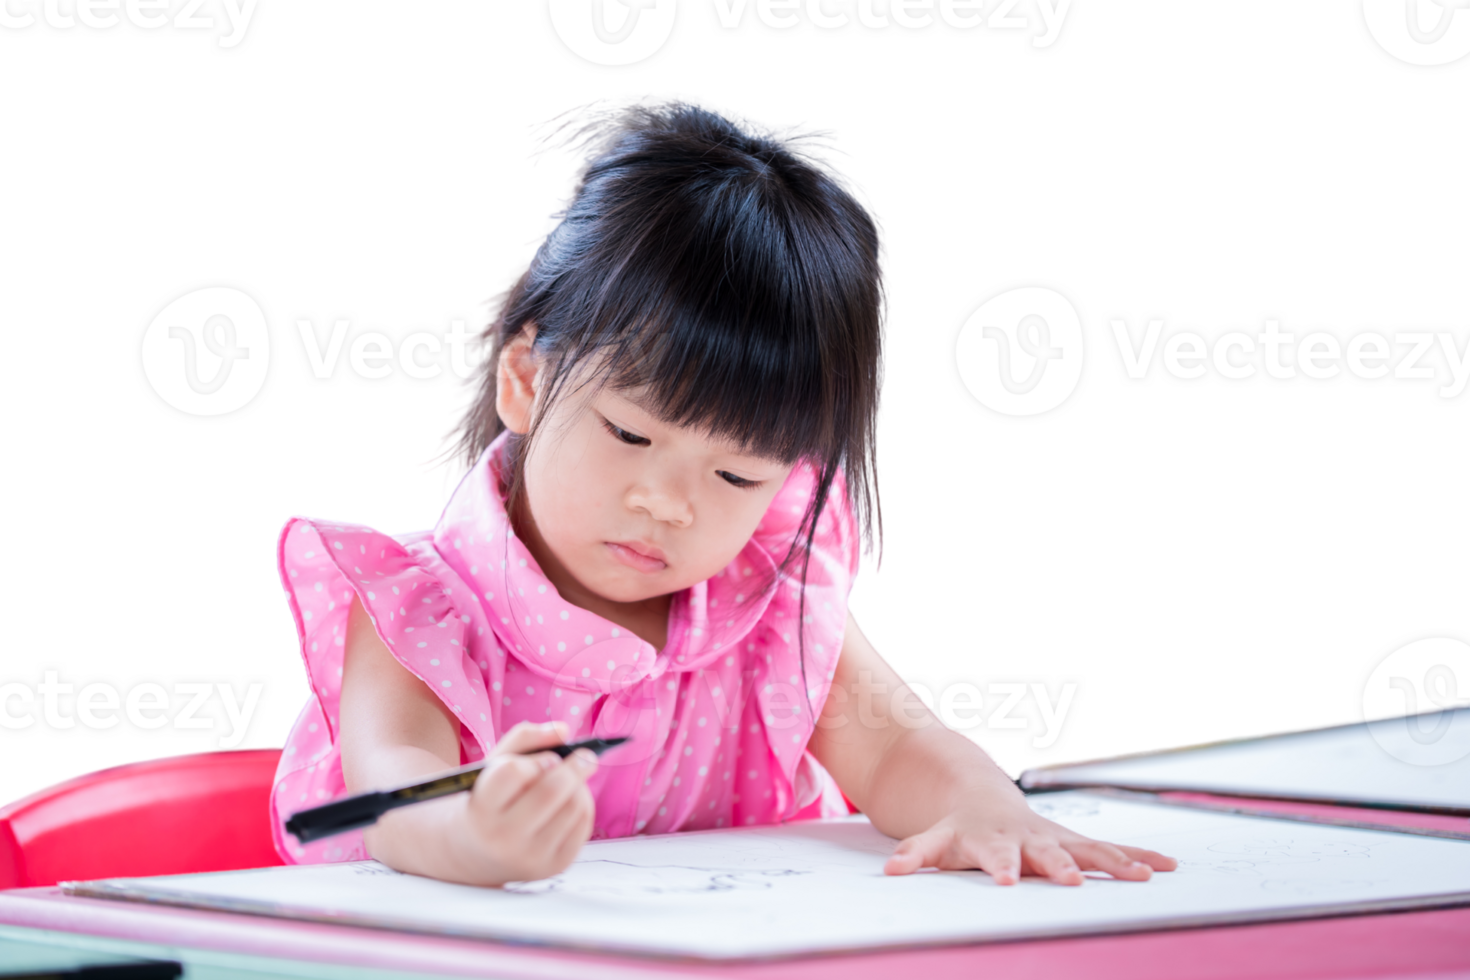 Young Girl 3 years old Focused on Drawing at Home, A little child in a pink dress intently drawing on a white paper, Kid showcasing creativity and early learning. Isolated background. png